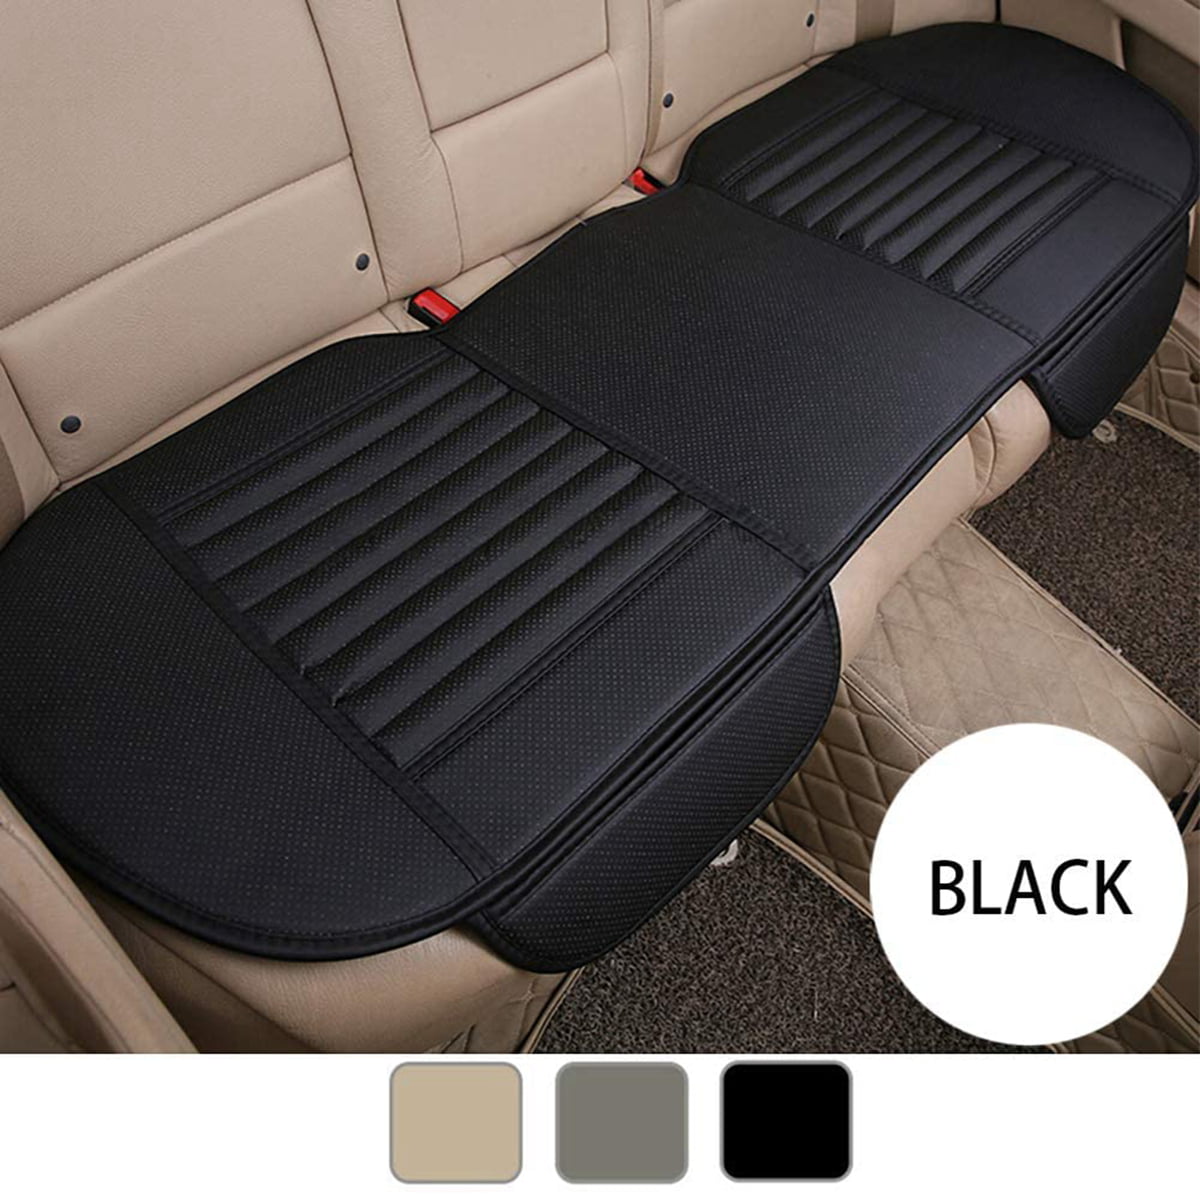 Non-Slip Bottom & Storage Pockets Car Rear Bench Seat Cushion Cover Pad Mat Filling Bamboo Charcoal 53.15'' x 19.29'' Beige Fit 95% of Vehicles Premium PU Leather Car Seat Cover 